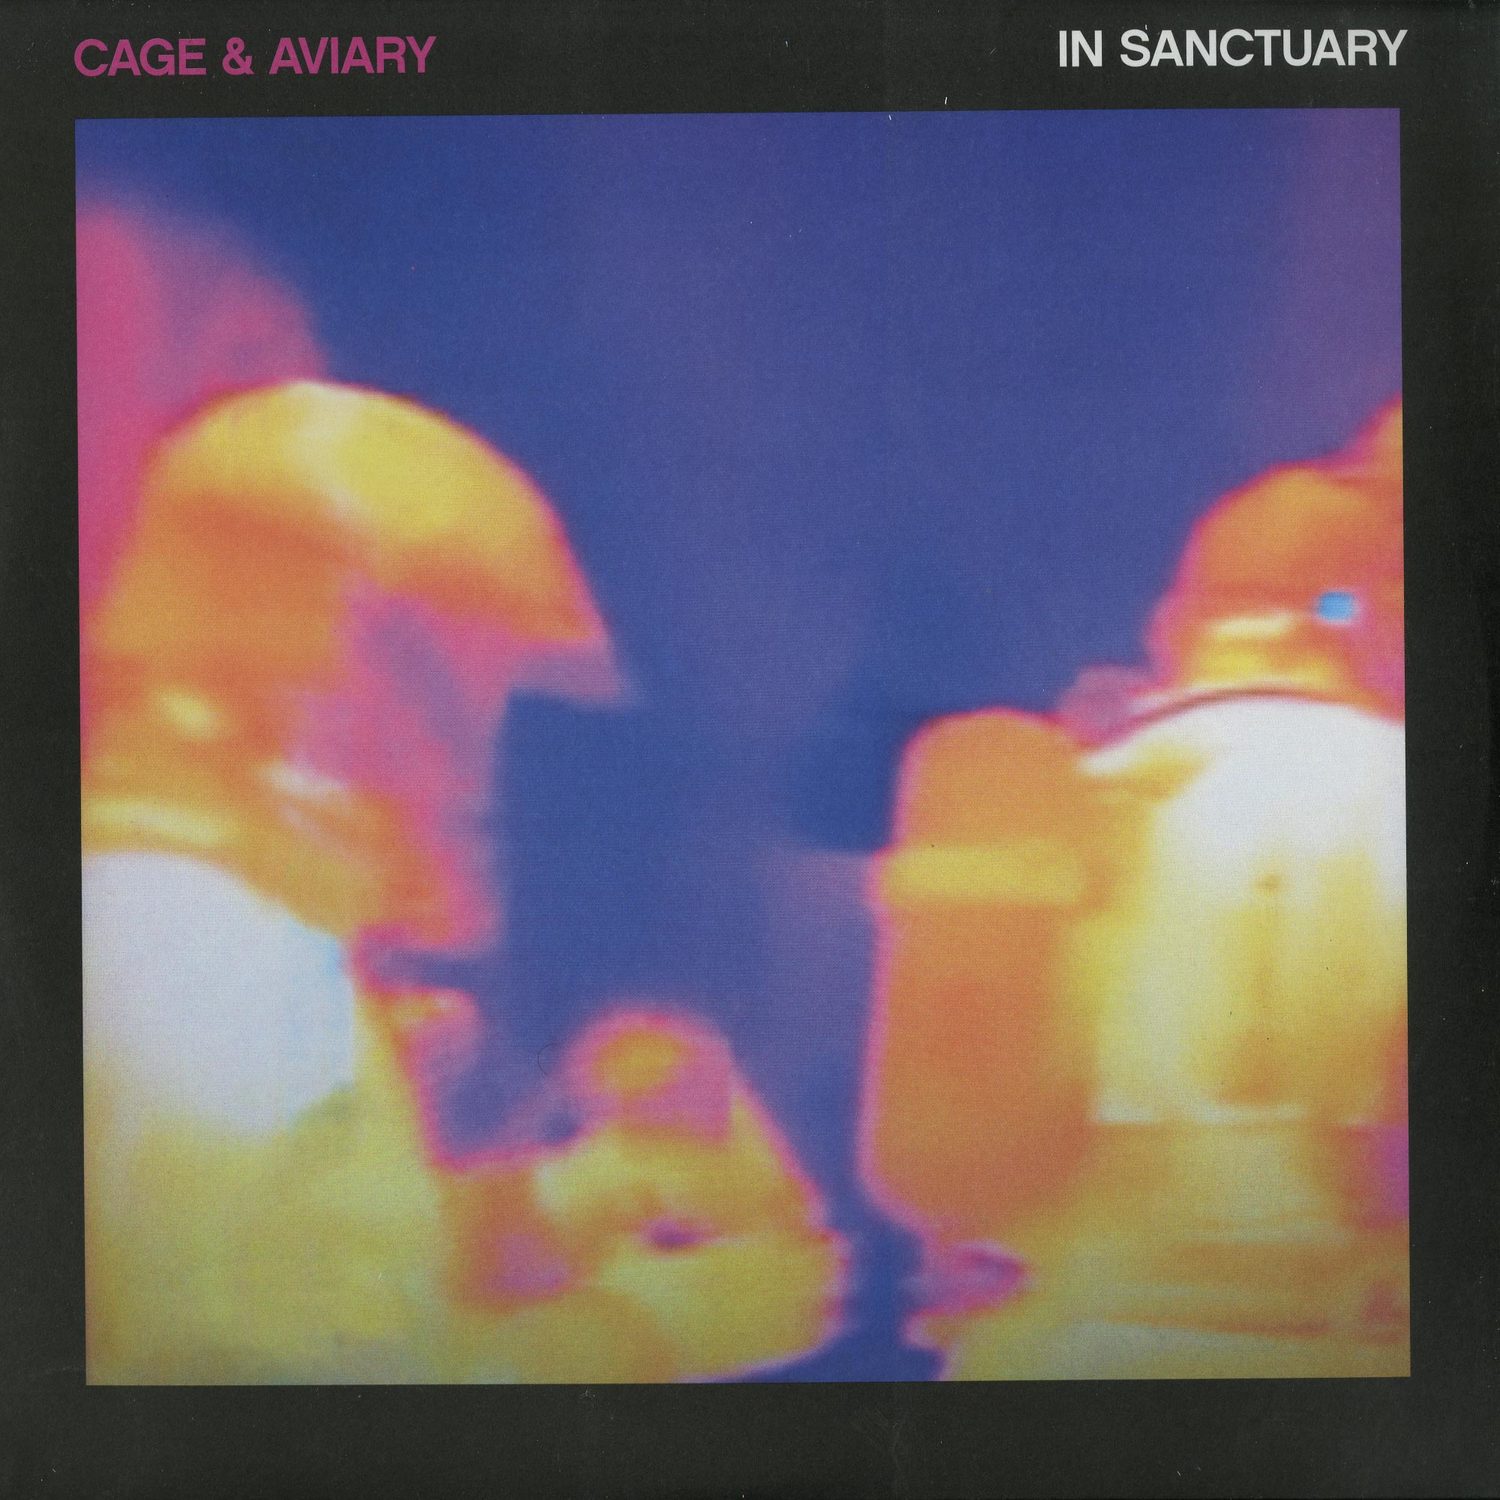 Cage & Aviary - IN SANCTUARY